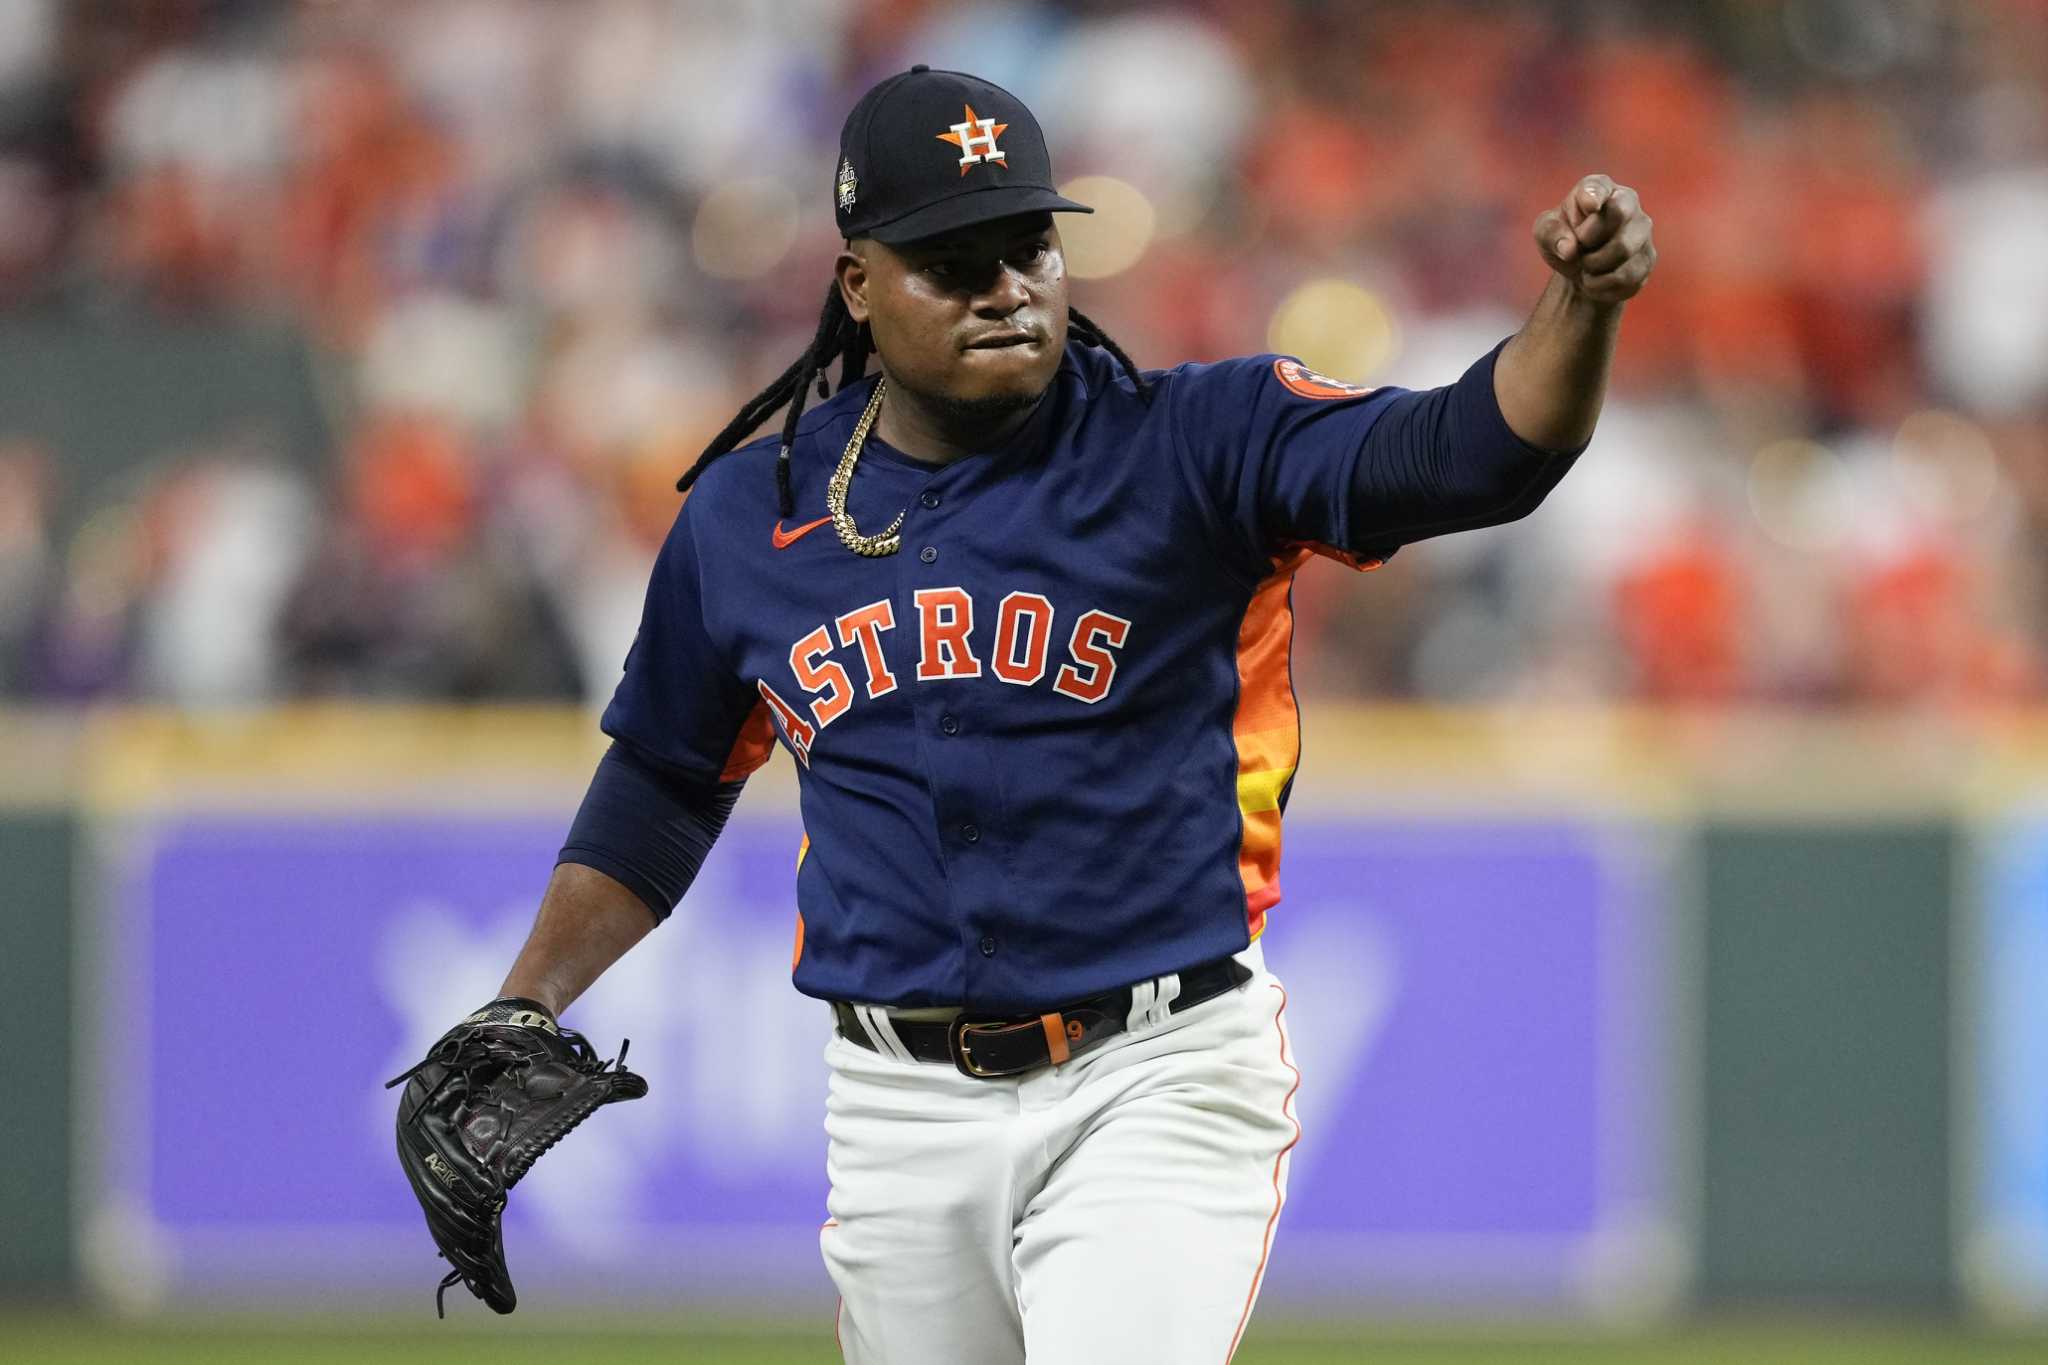 Framber Valdez helps Astros to 7-4 win over Red Sox